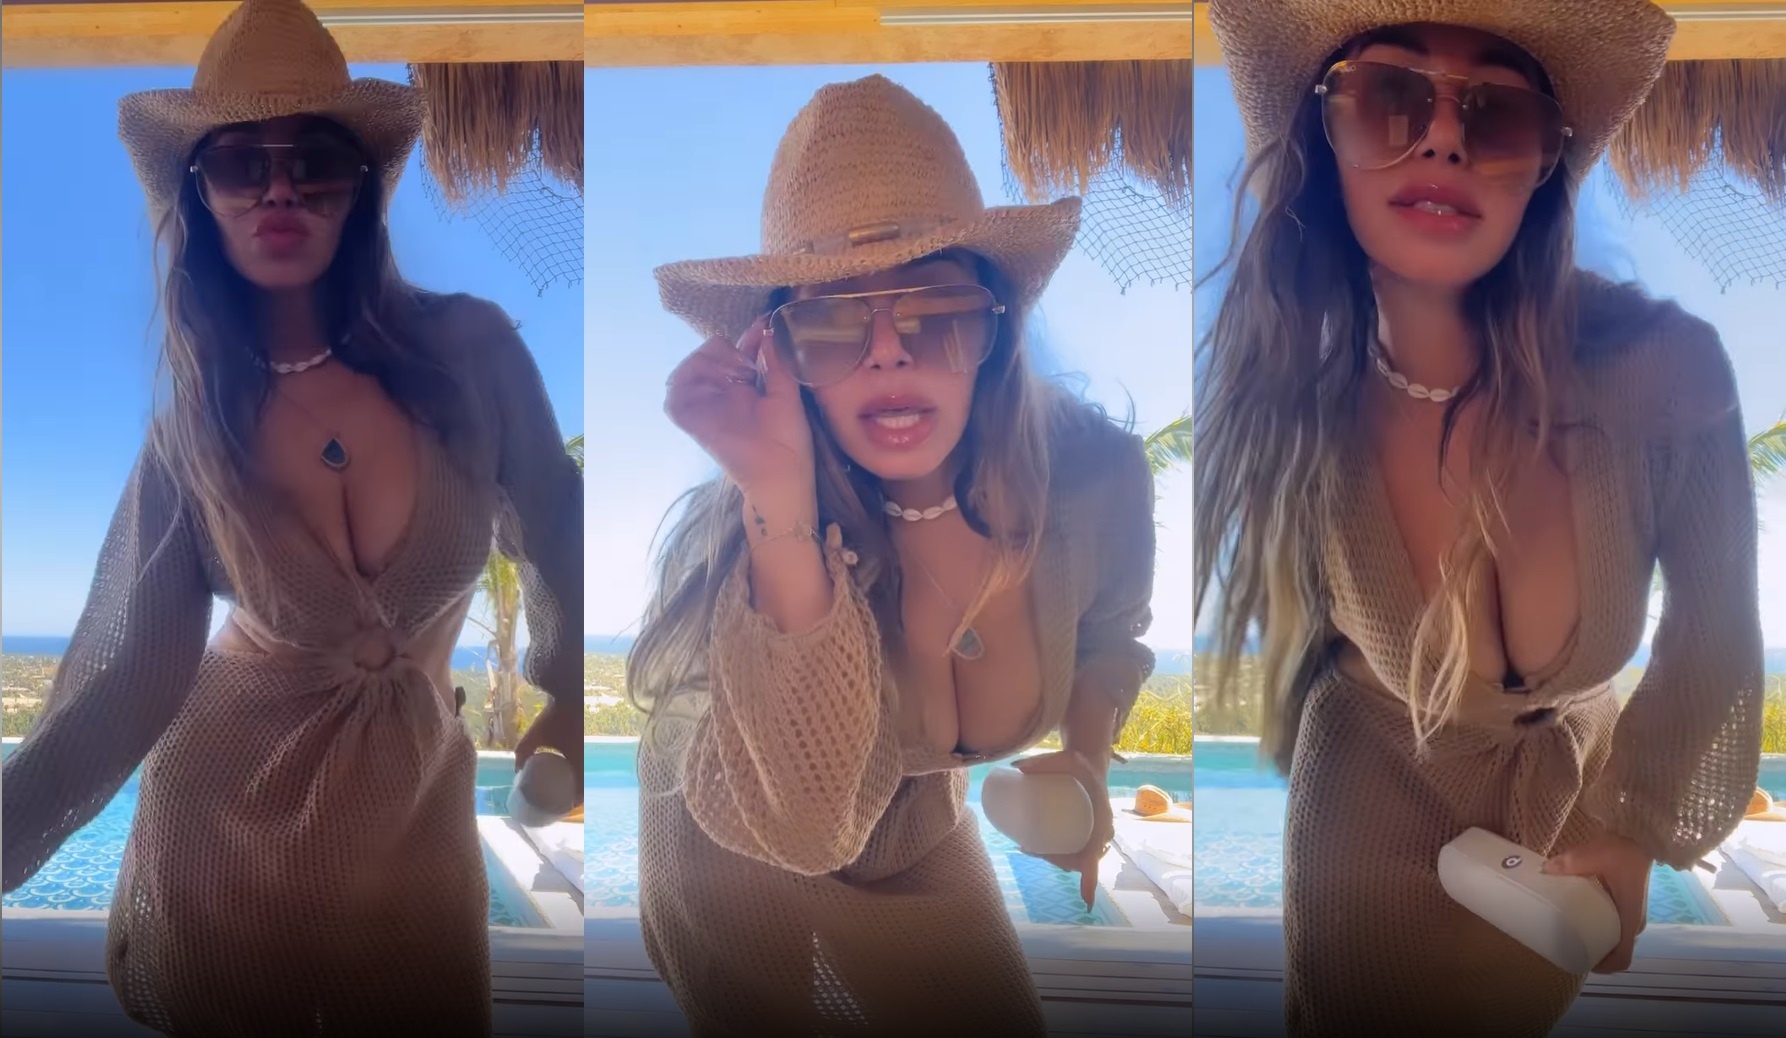 Chiquis Rivera dances by the pool in a fishnet minidress